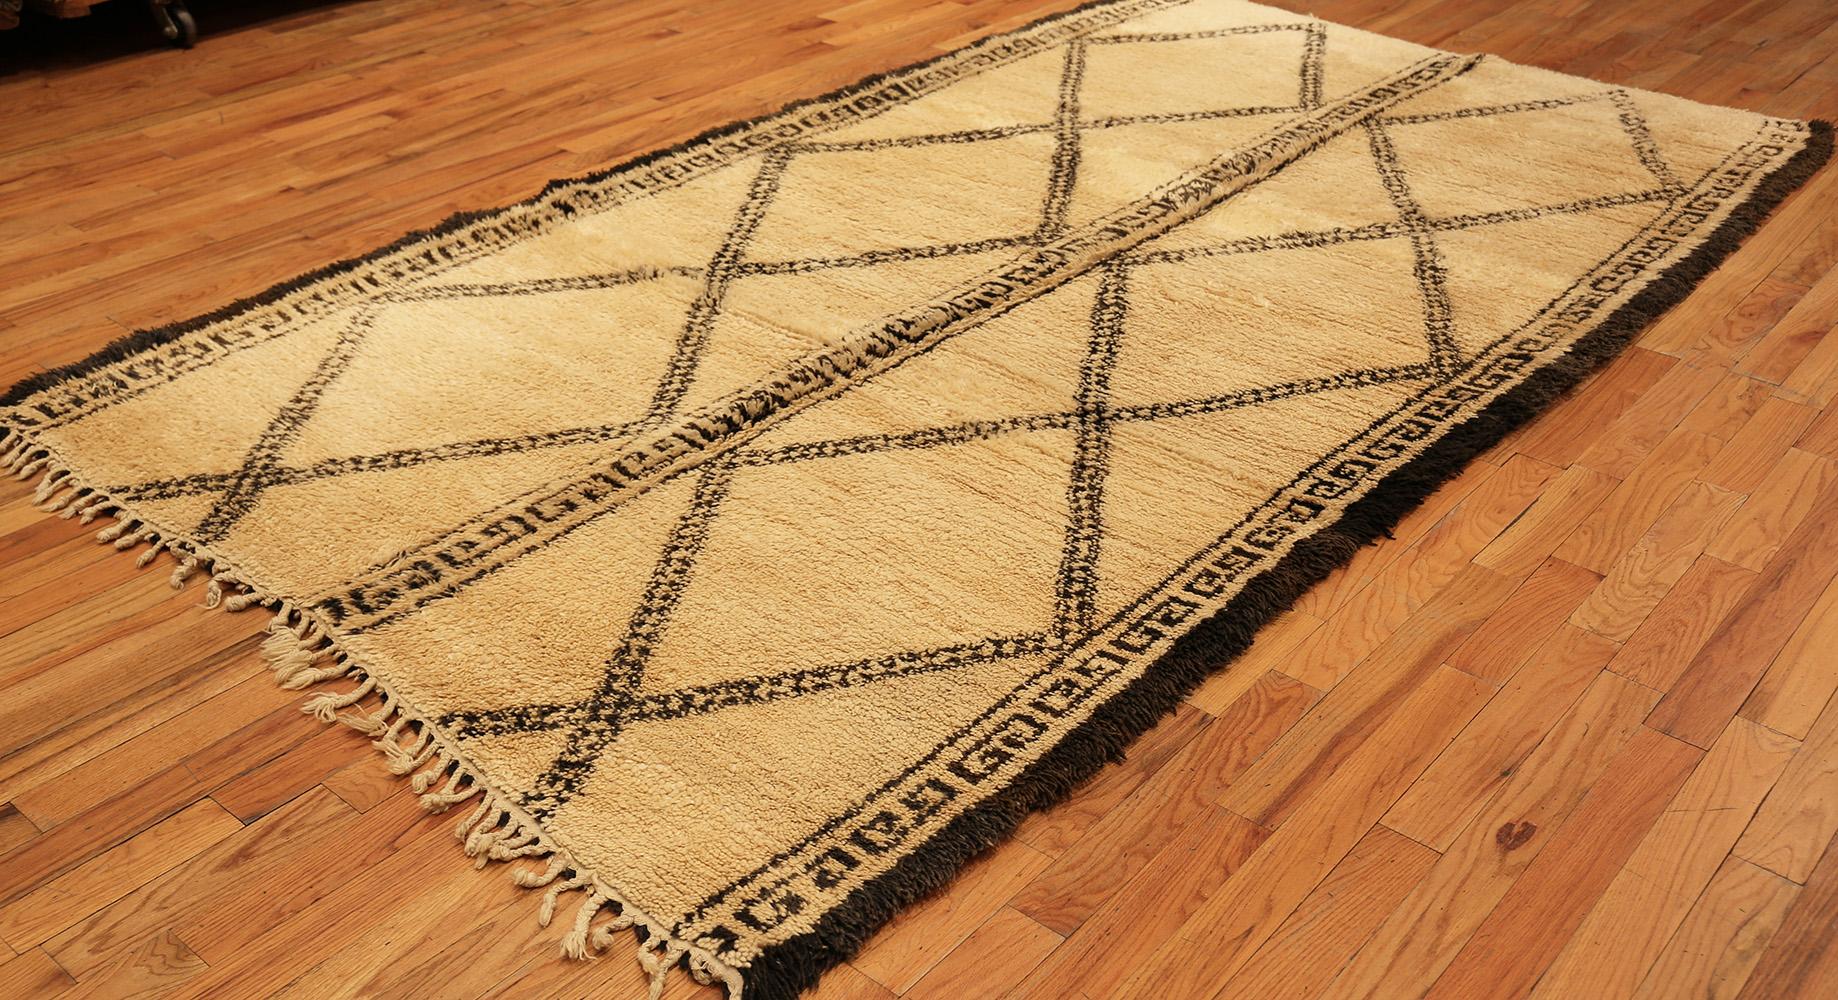 Vintage Moroccan Rug, Morocco, Mid 20th Century – Size: 6 ft 4 in x 11 ft 1 in (1.93 m x 3.38 m)

This exceptional example of the beauty of vintage rugs from Morocco features a sophisticated compartmental composition with decorative strap work